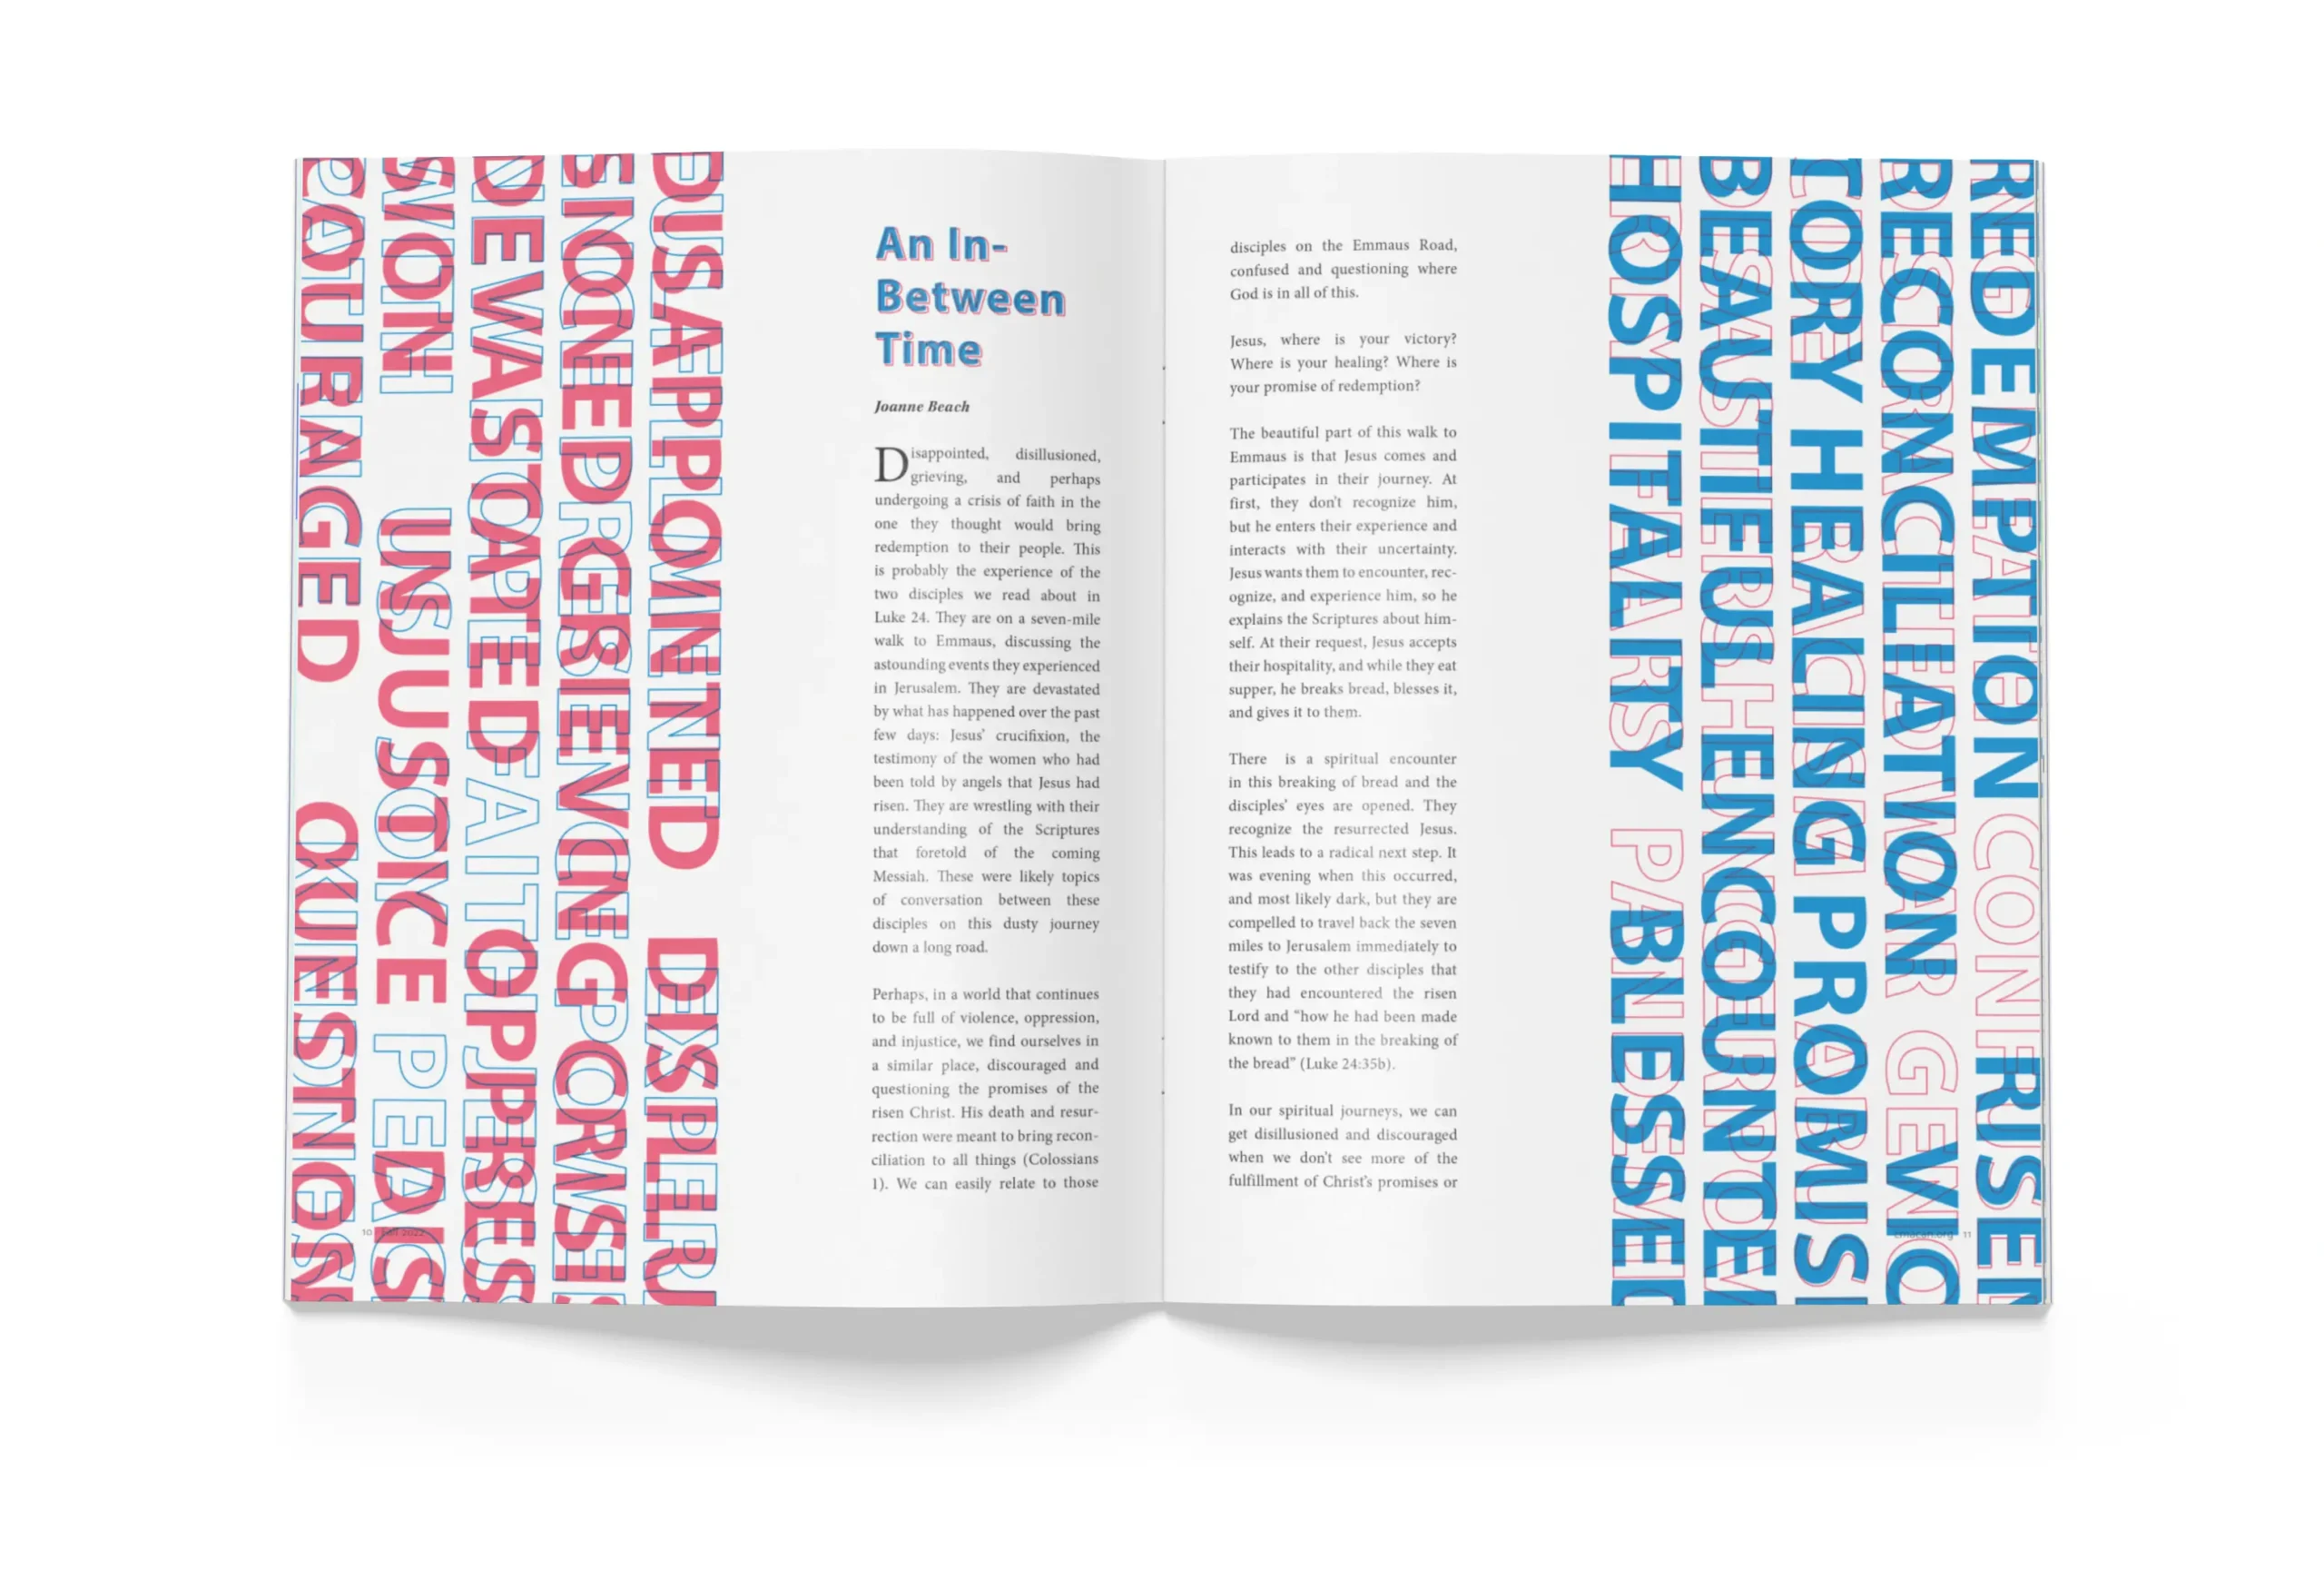 A typographic illustration using the words from the article. Left side of the page features negative words with positive words overlaid but faint. The right side features negative words faintly, but the positive words prominently. The idea was supposed to portray we're in-between heaven and hell, moving toward heaven, but not there yet.